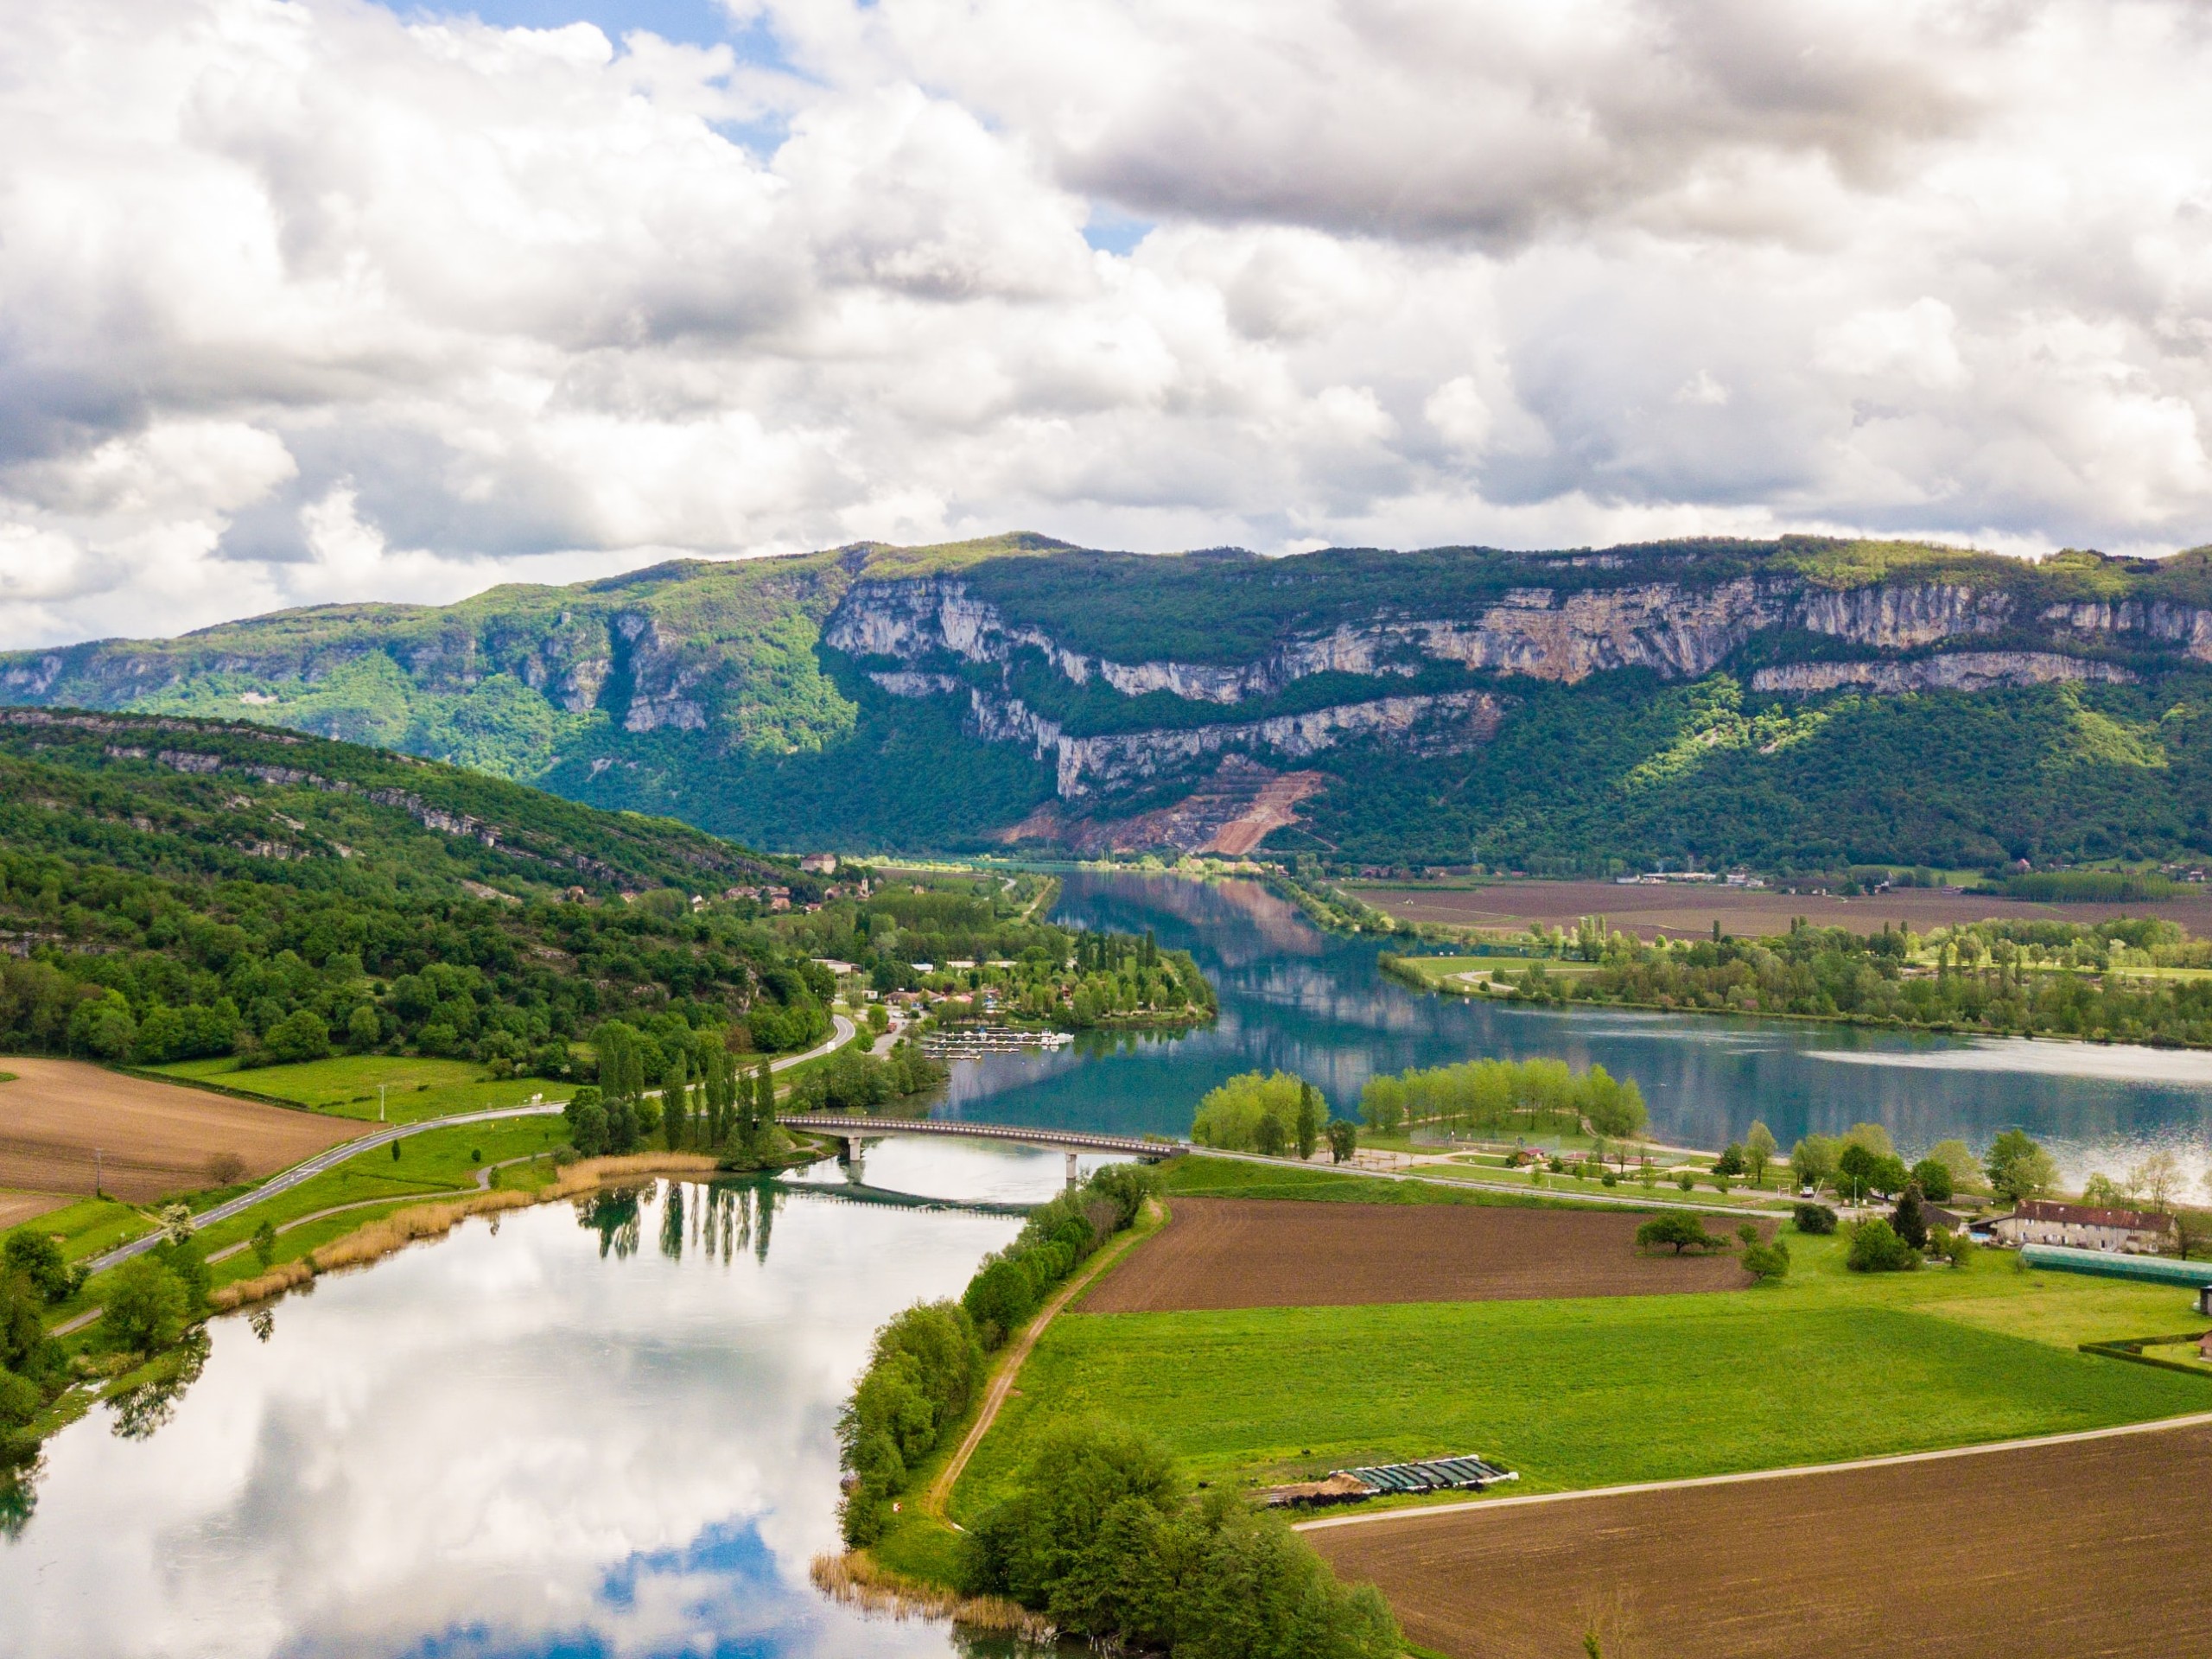 Colorful views along the Rhone river